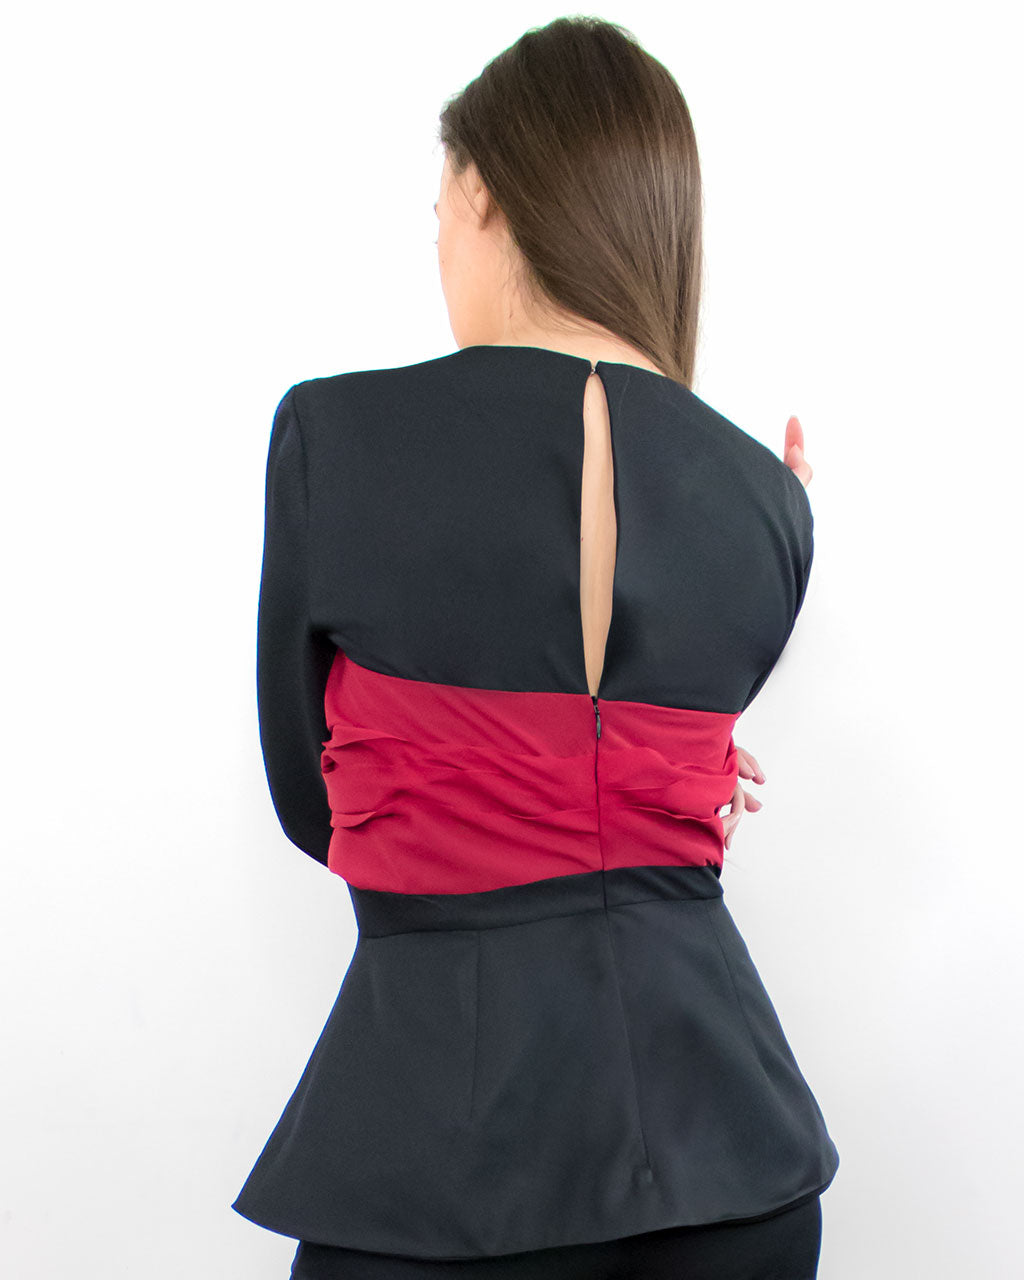 Annes Black Peplum Blouse with Bow